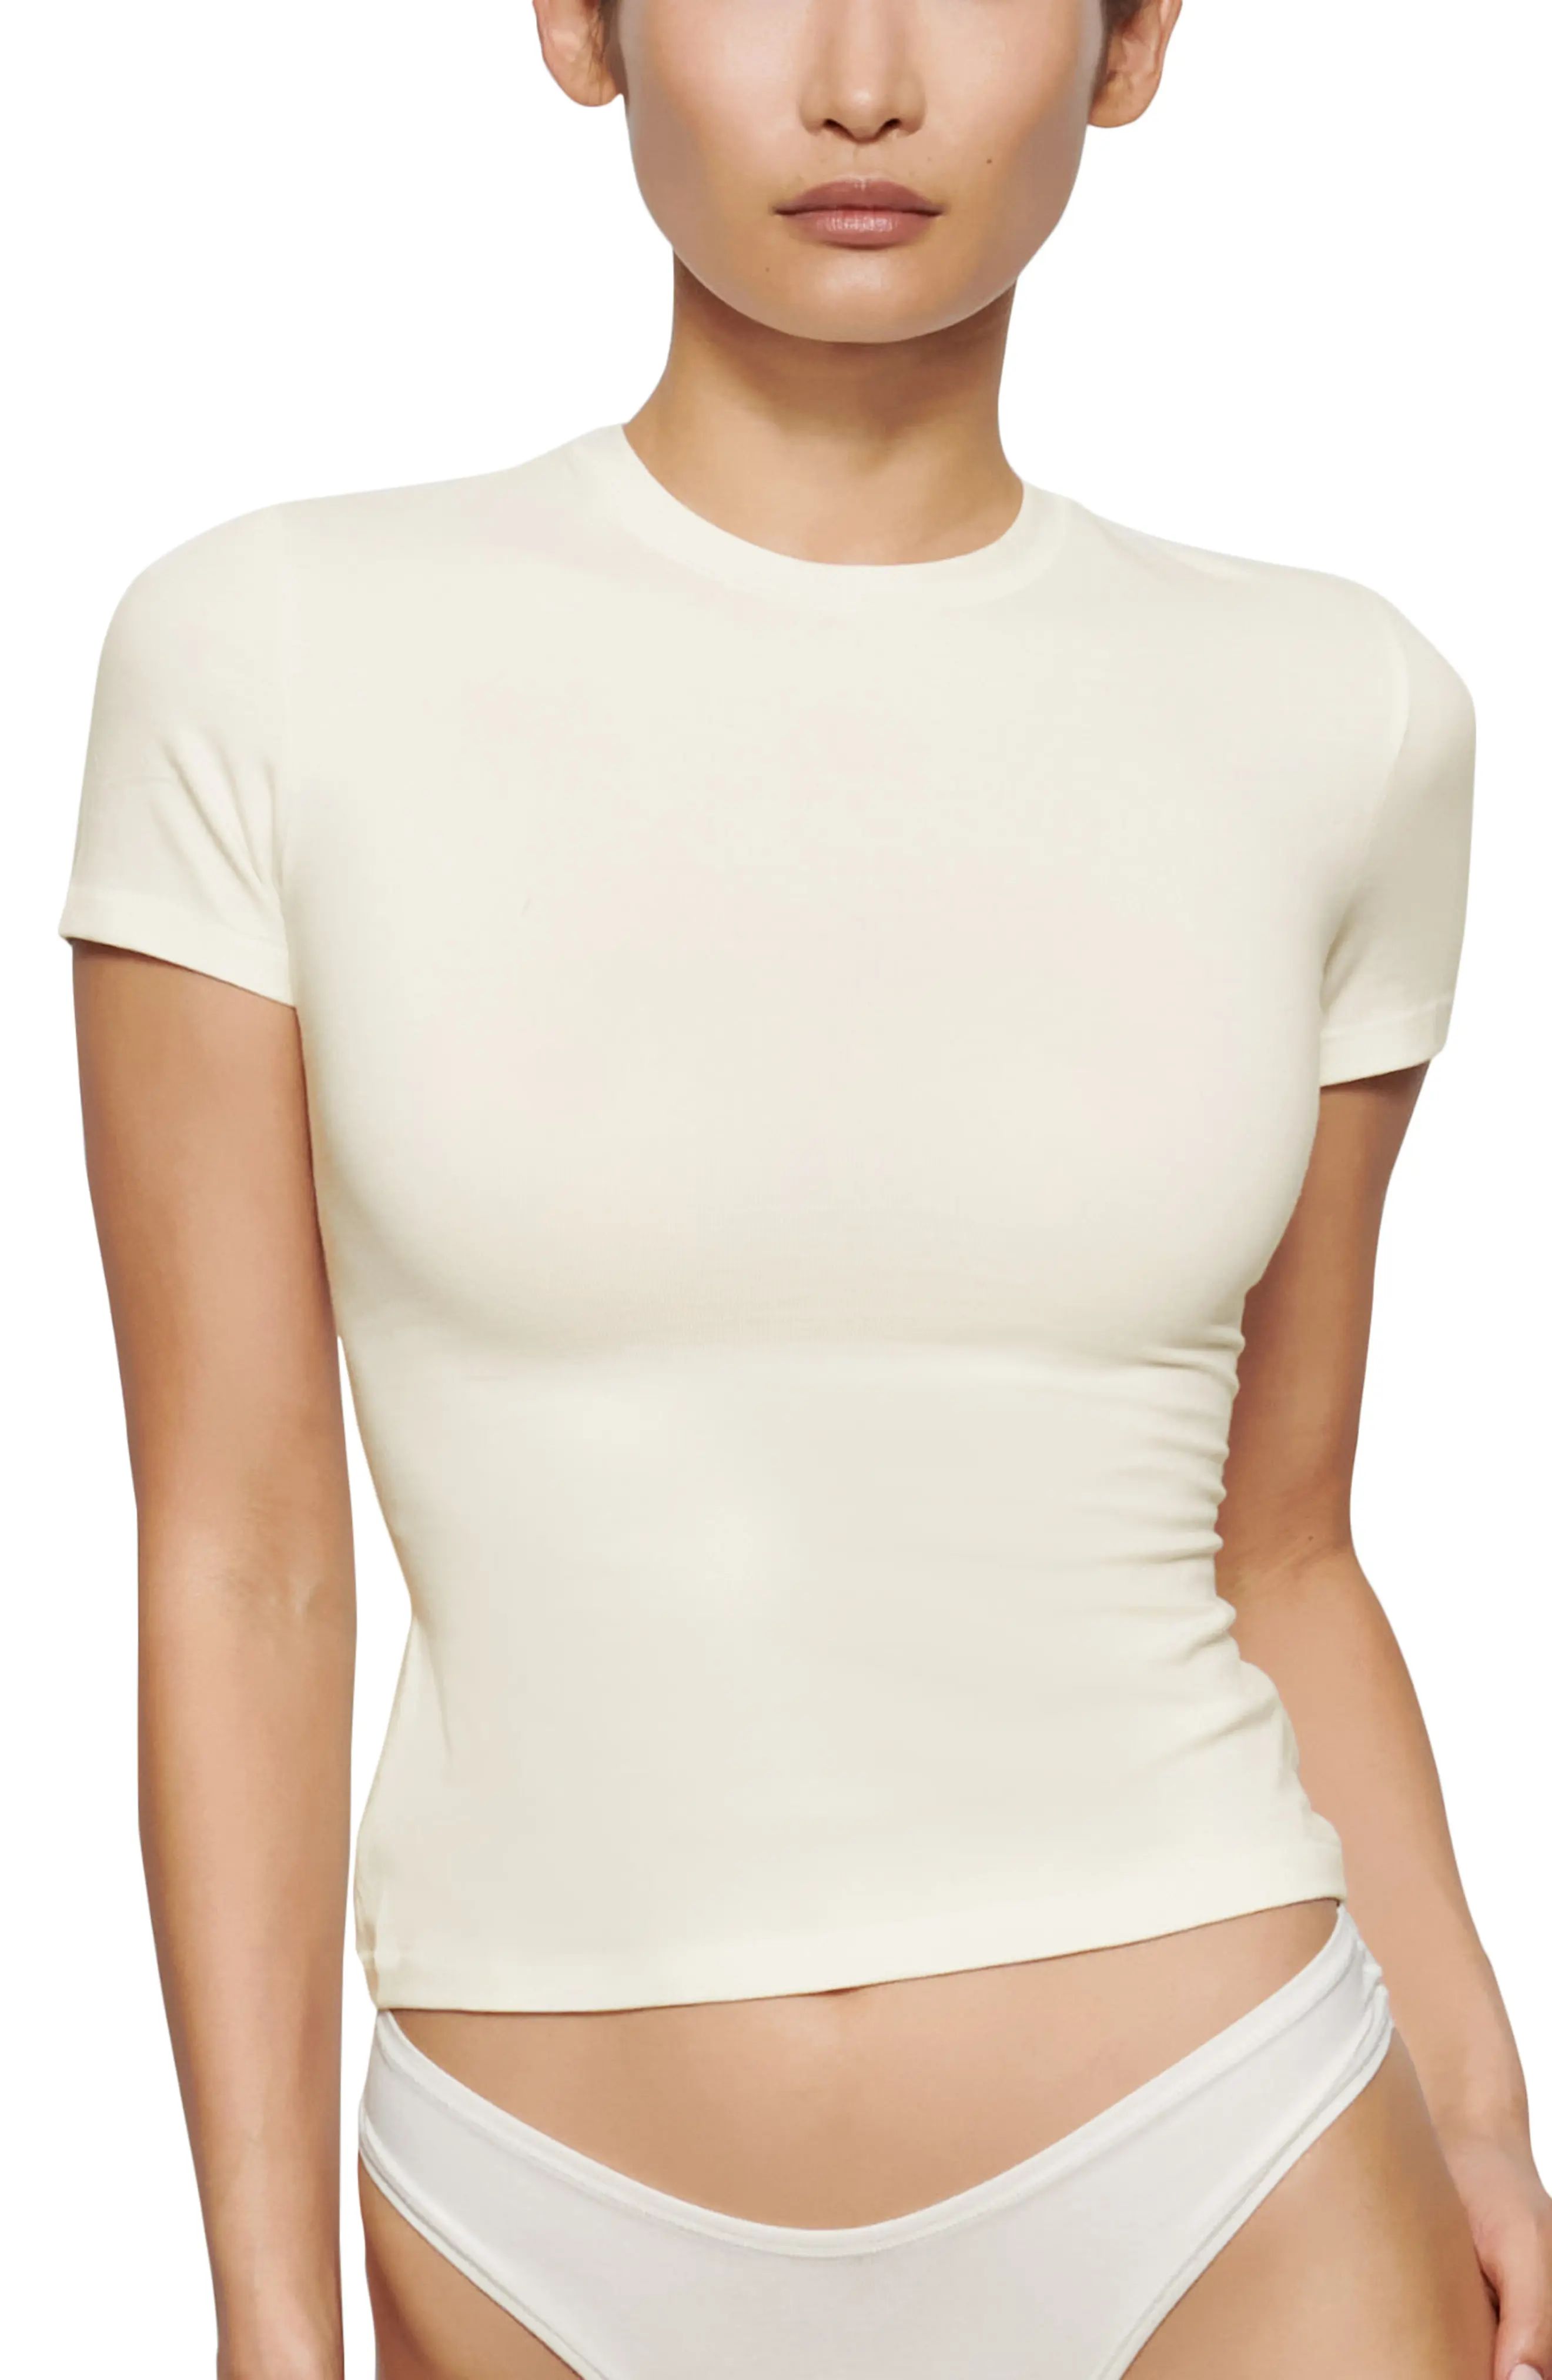 Women's Skims Stretch Cotton Tee, Size Small - Ivory | Nordstrom